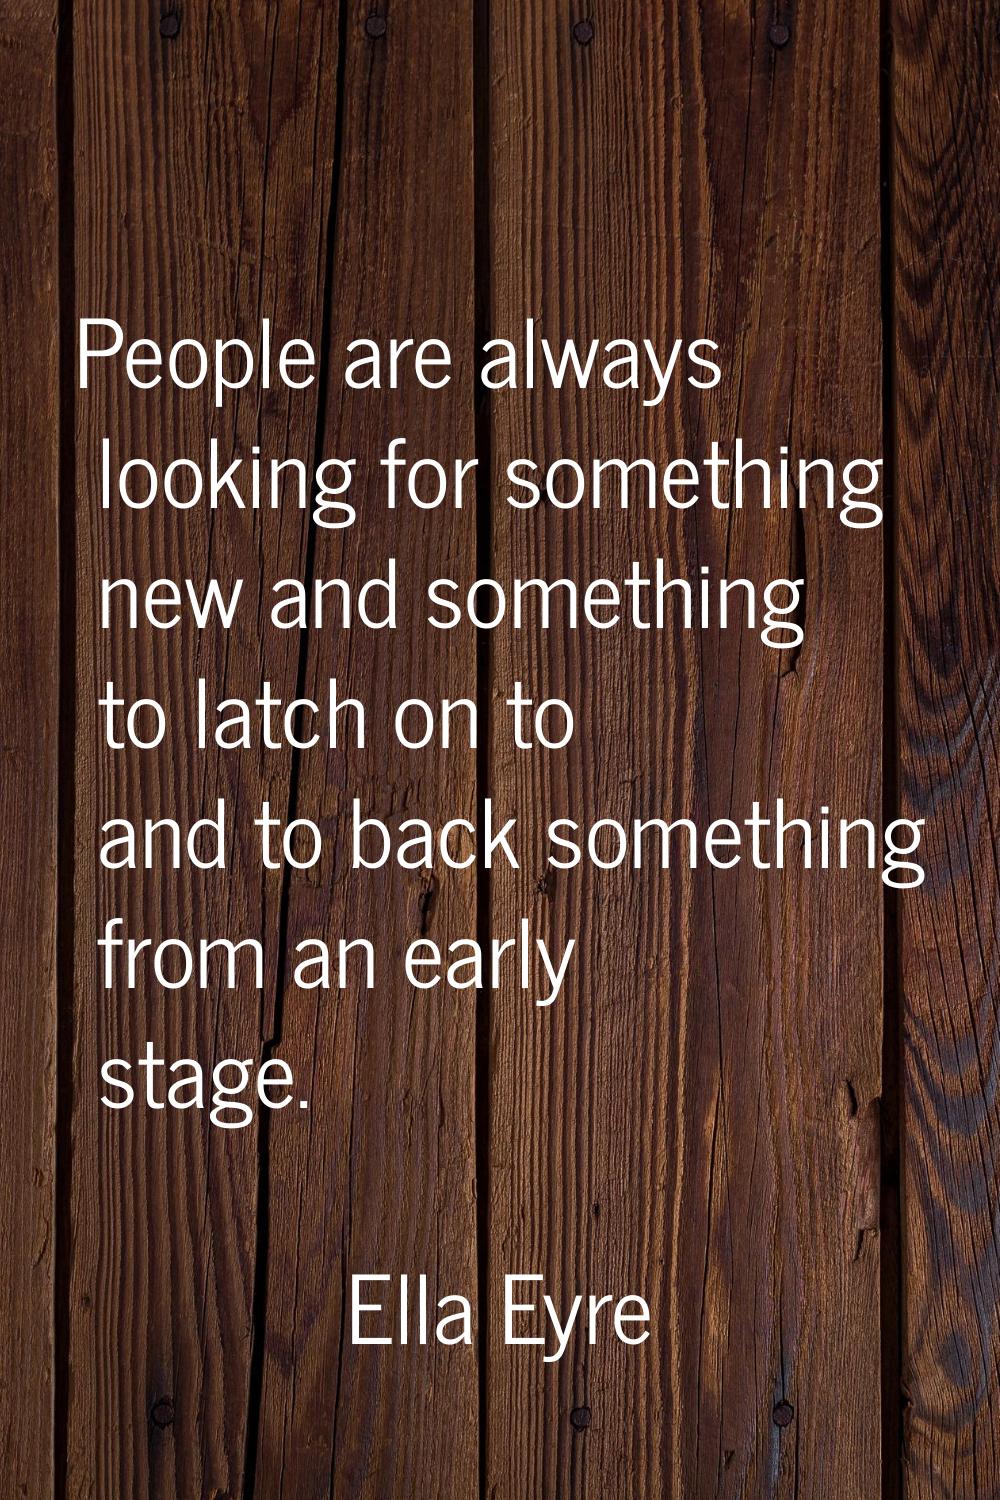 People are always looking for something new and something to latch on to and to back something from